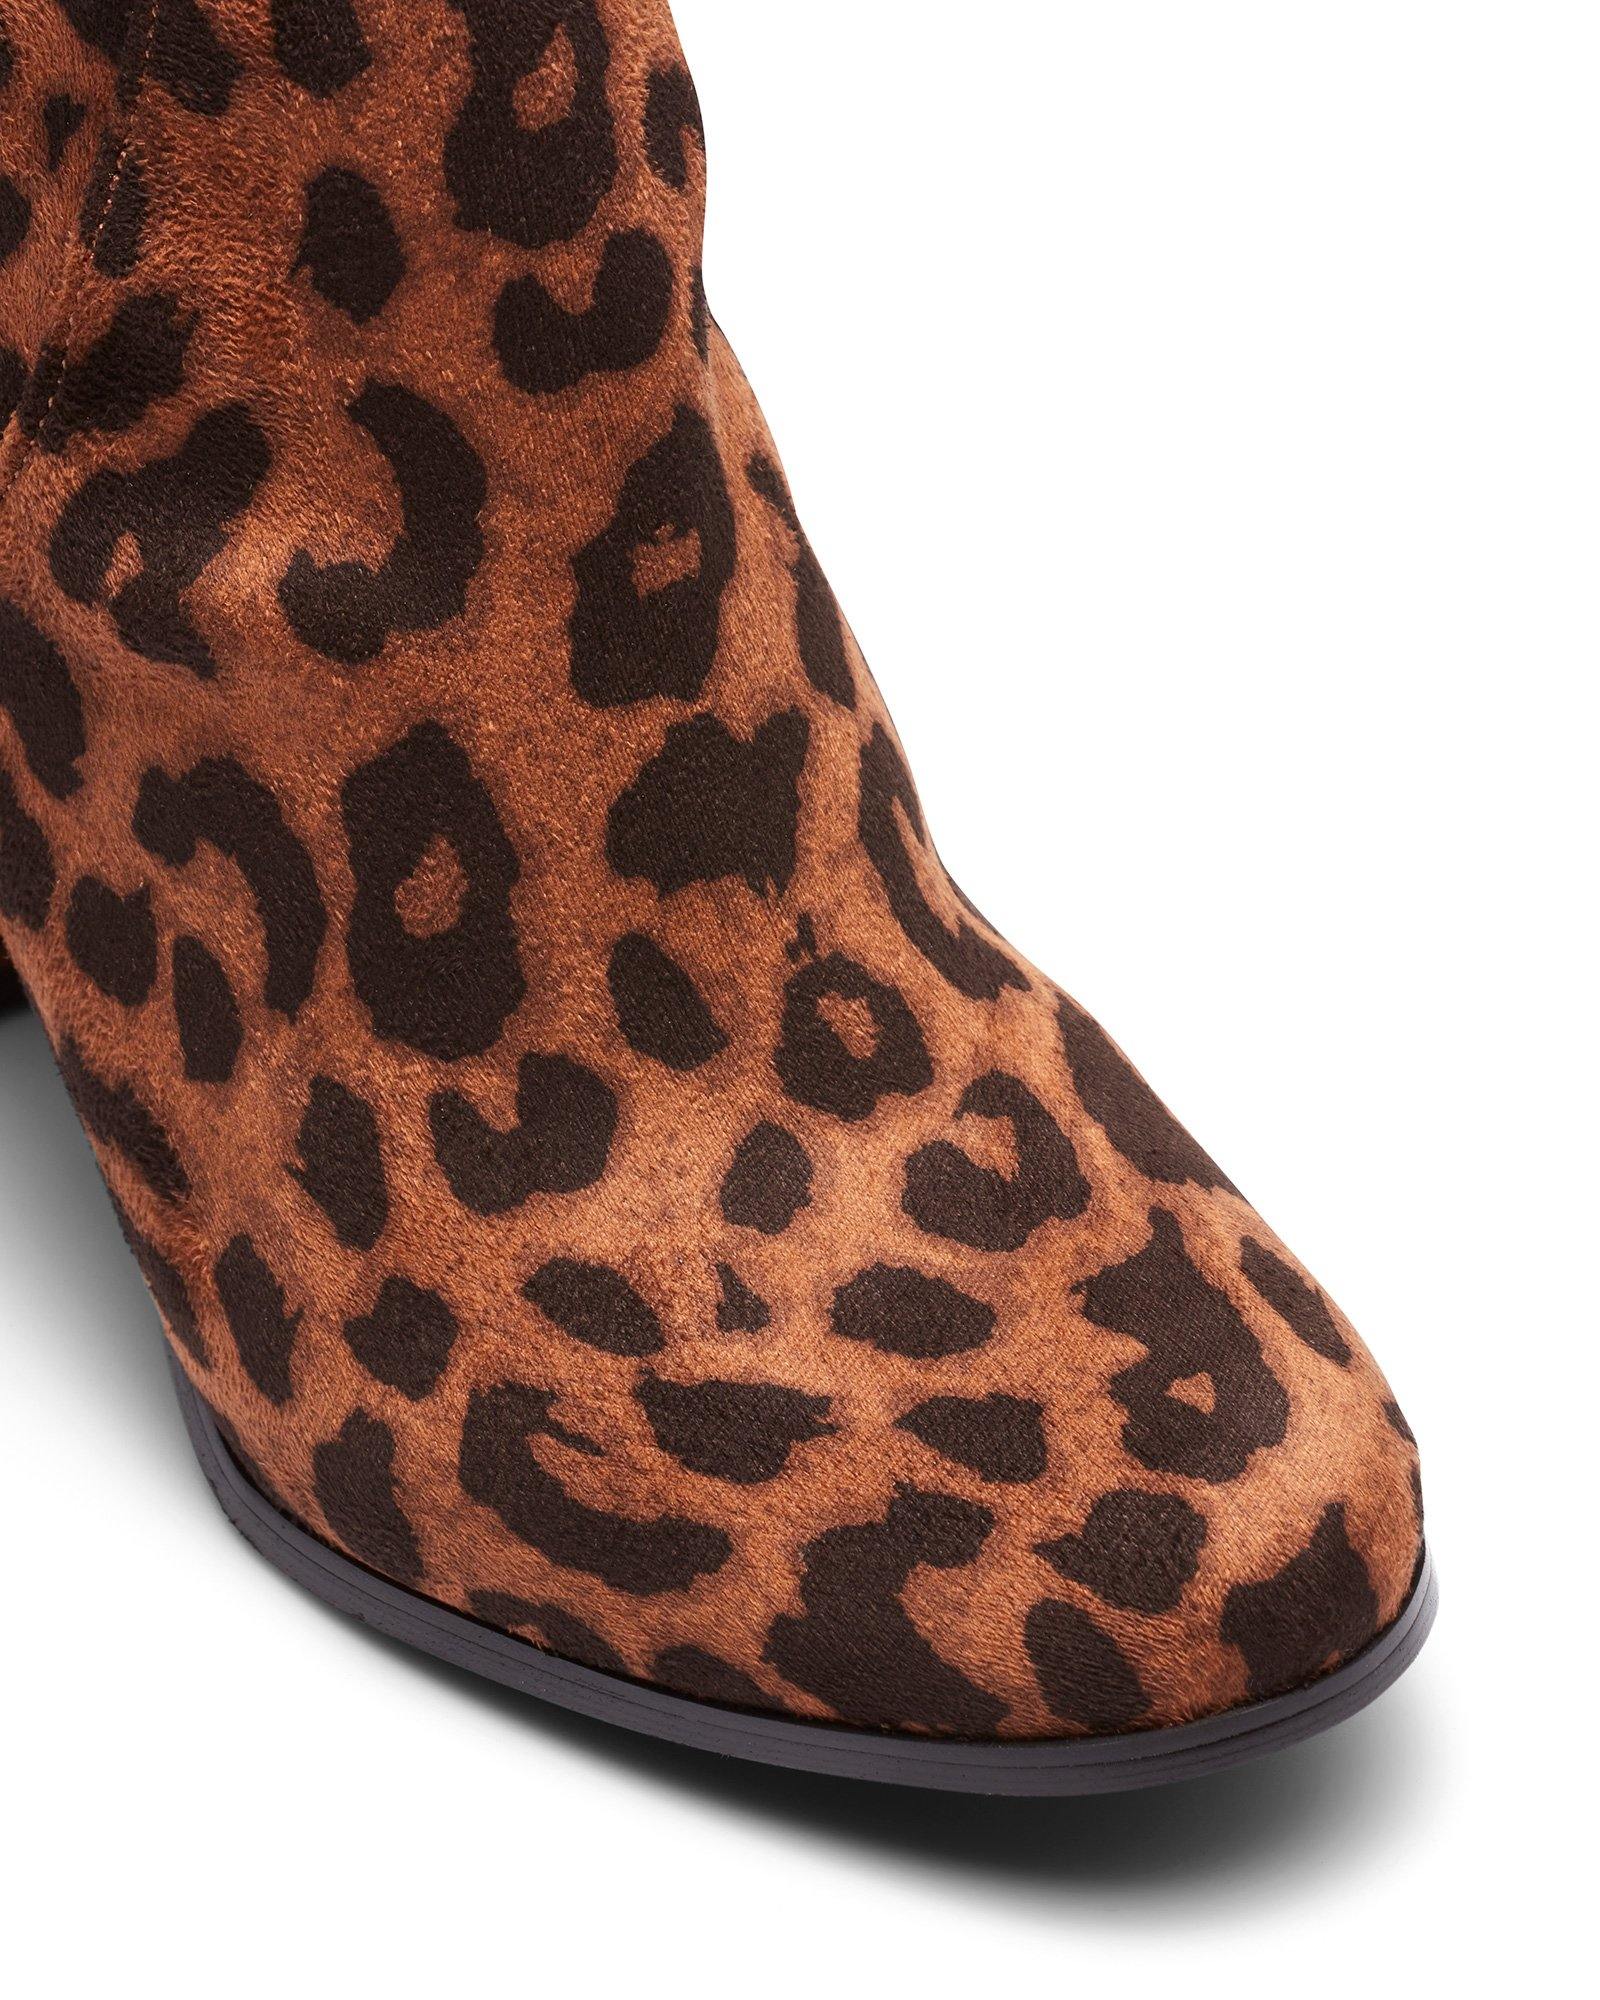 Therapy Shoes Hanover Leopard | Women's Boots | Over The Knee 